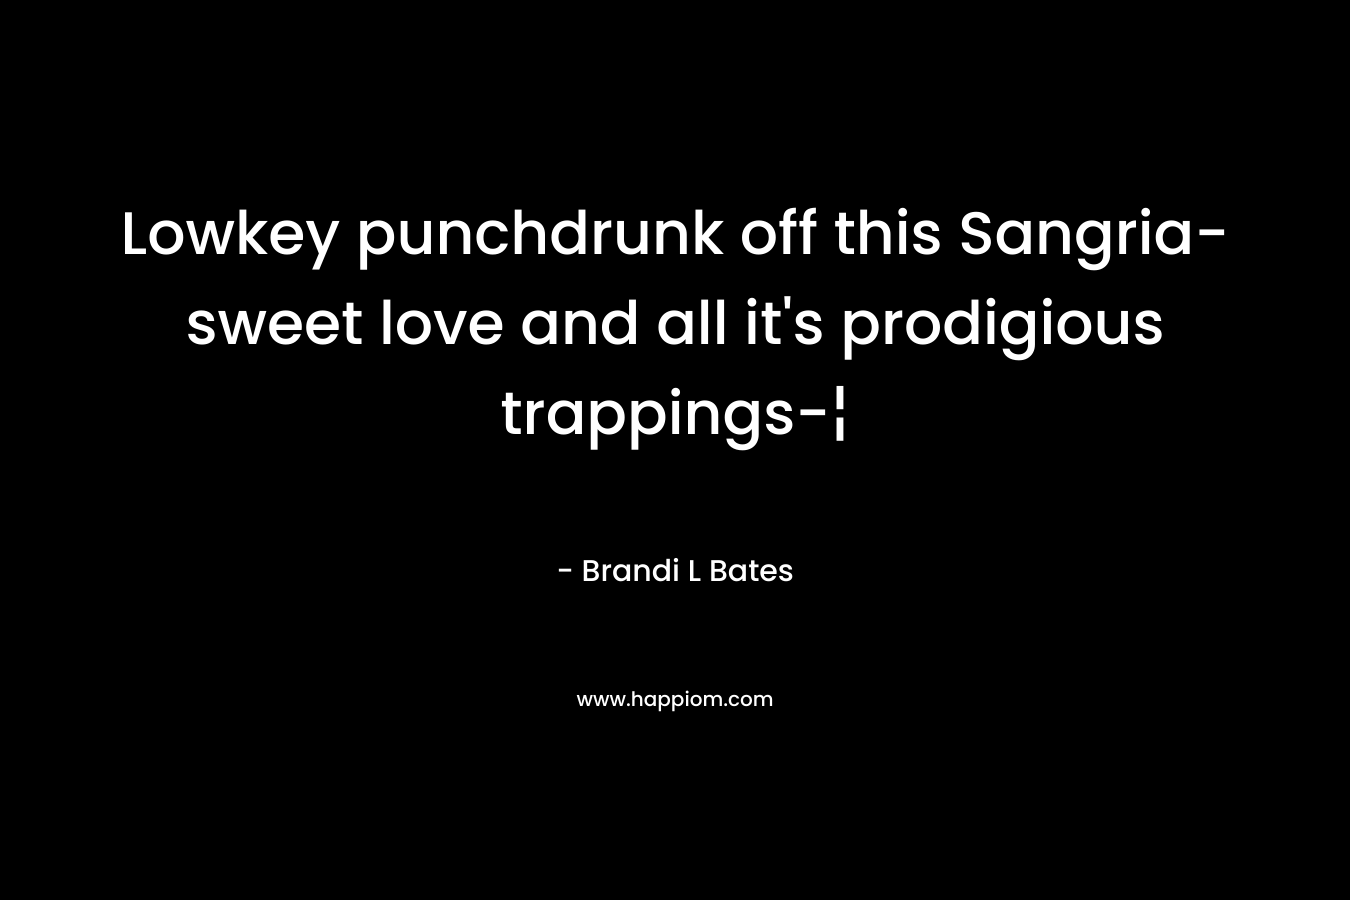 Lowkey punchdrunk off this Sangria-sweet love and all it’s prodigious trappings-¦ – Brandi L Bates